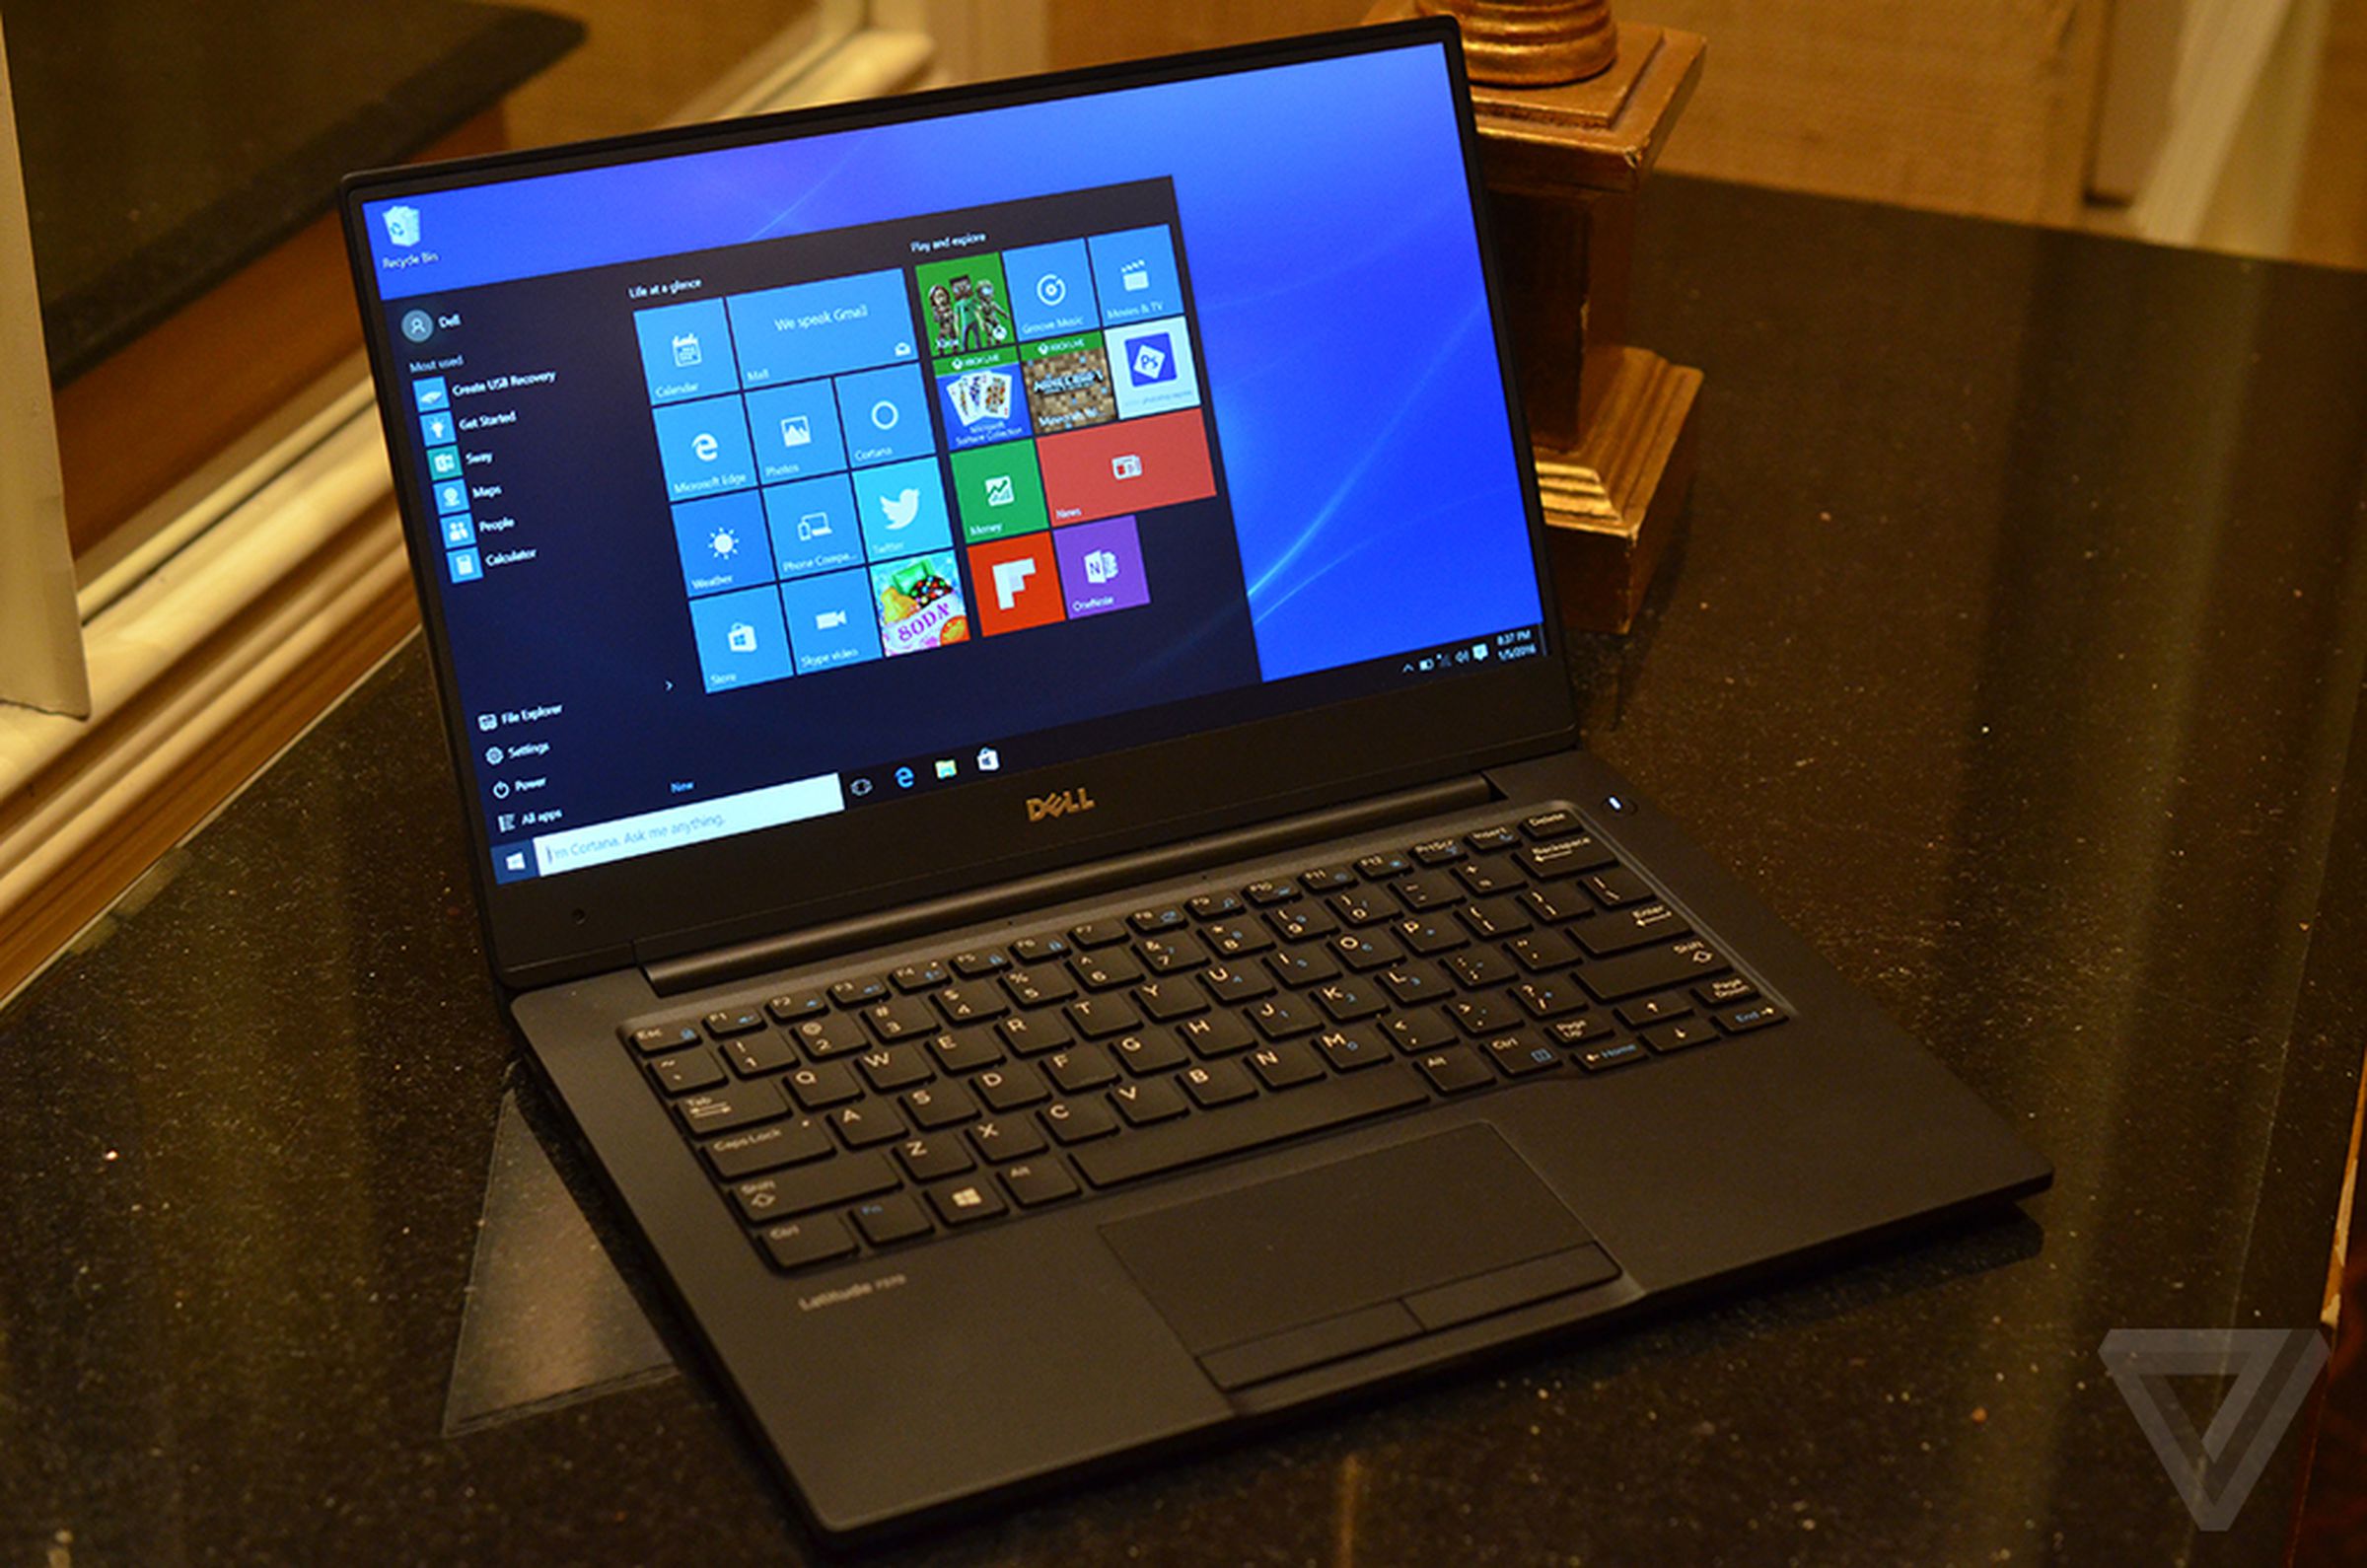 Dell Latitude 13 (2016) hands-on photos